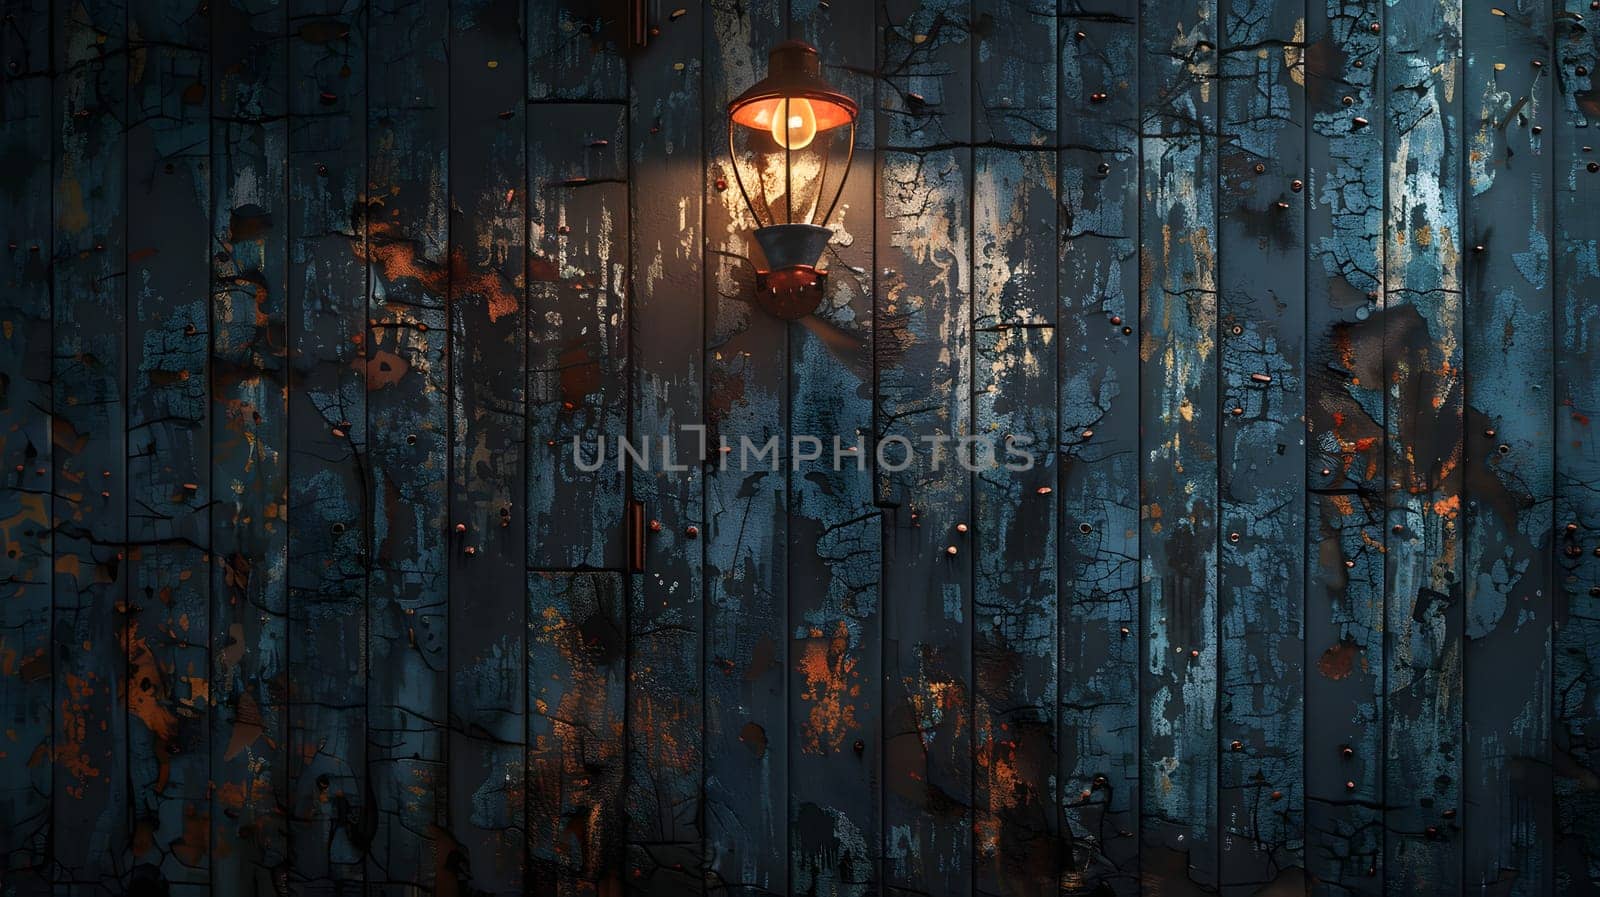 A wooden wall with a lamp hanging from it in the natural landscape at midnight by Nadtochiy